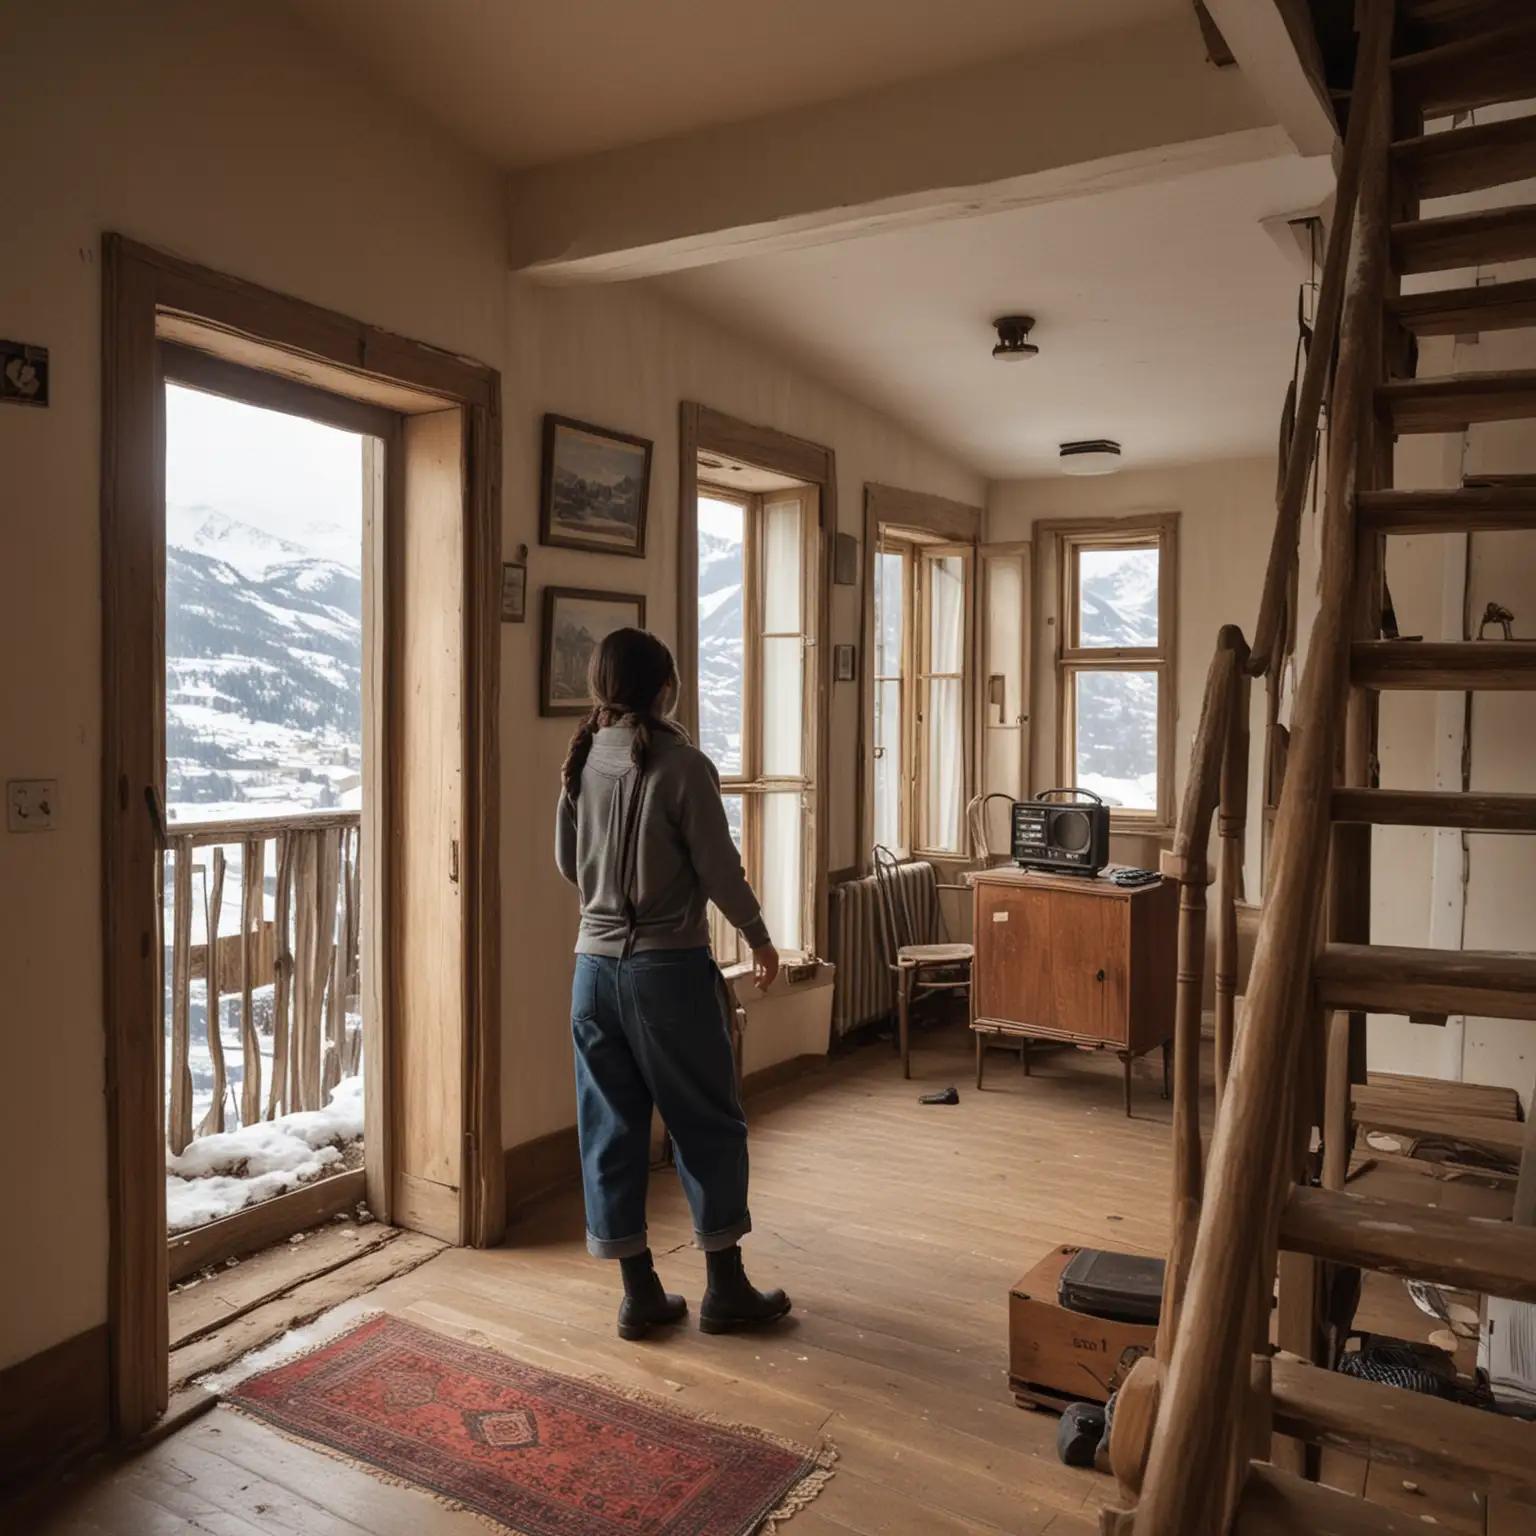 Young Woman Climbing Stairs in Village House Overlooking Snowy Mountains